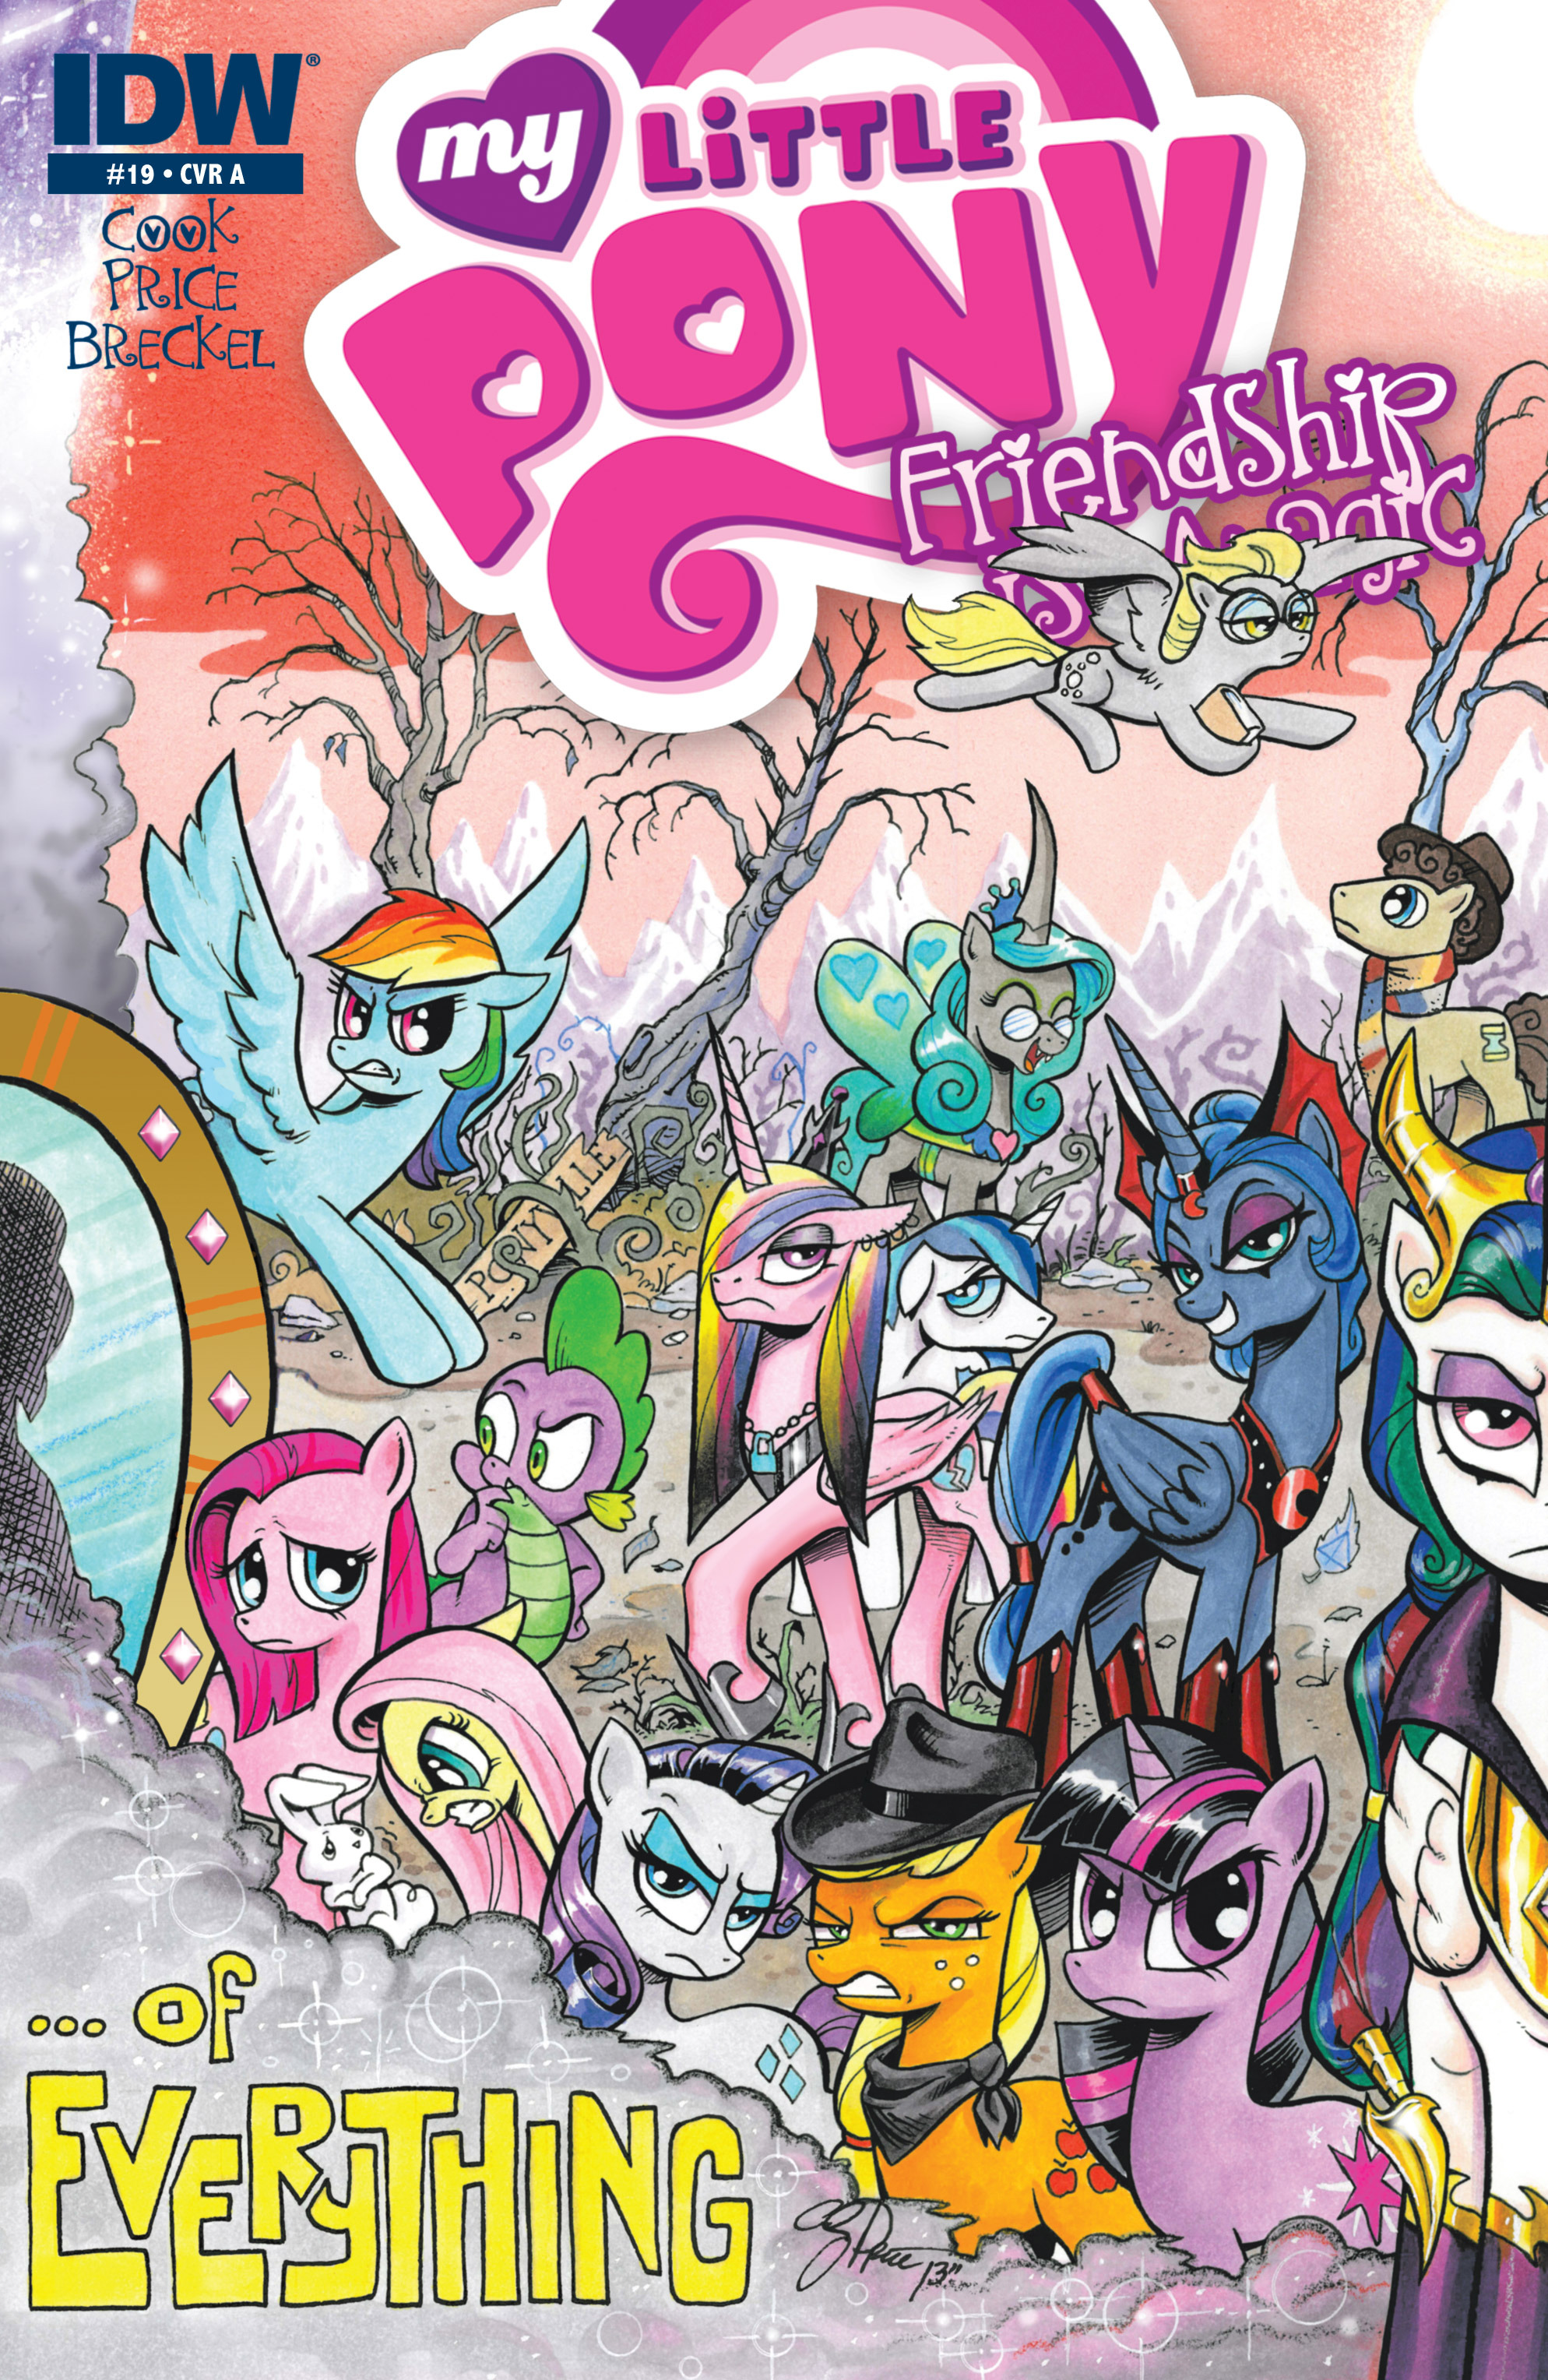 Read online My Little Pony: Friendship is Magic comic -  Issue #19 - 1